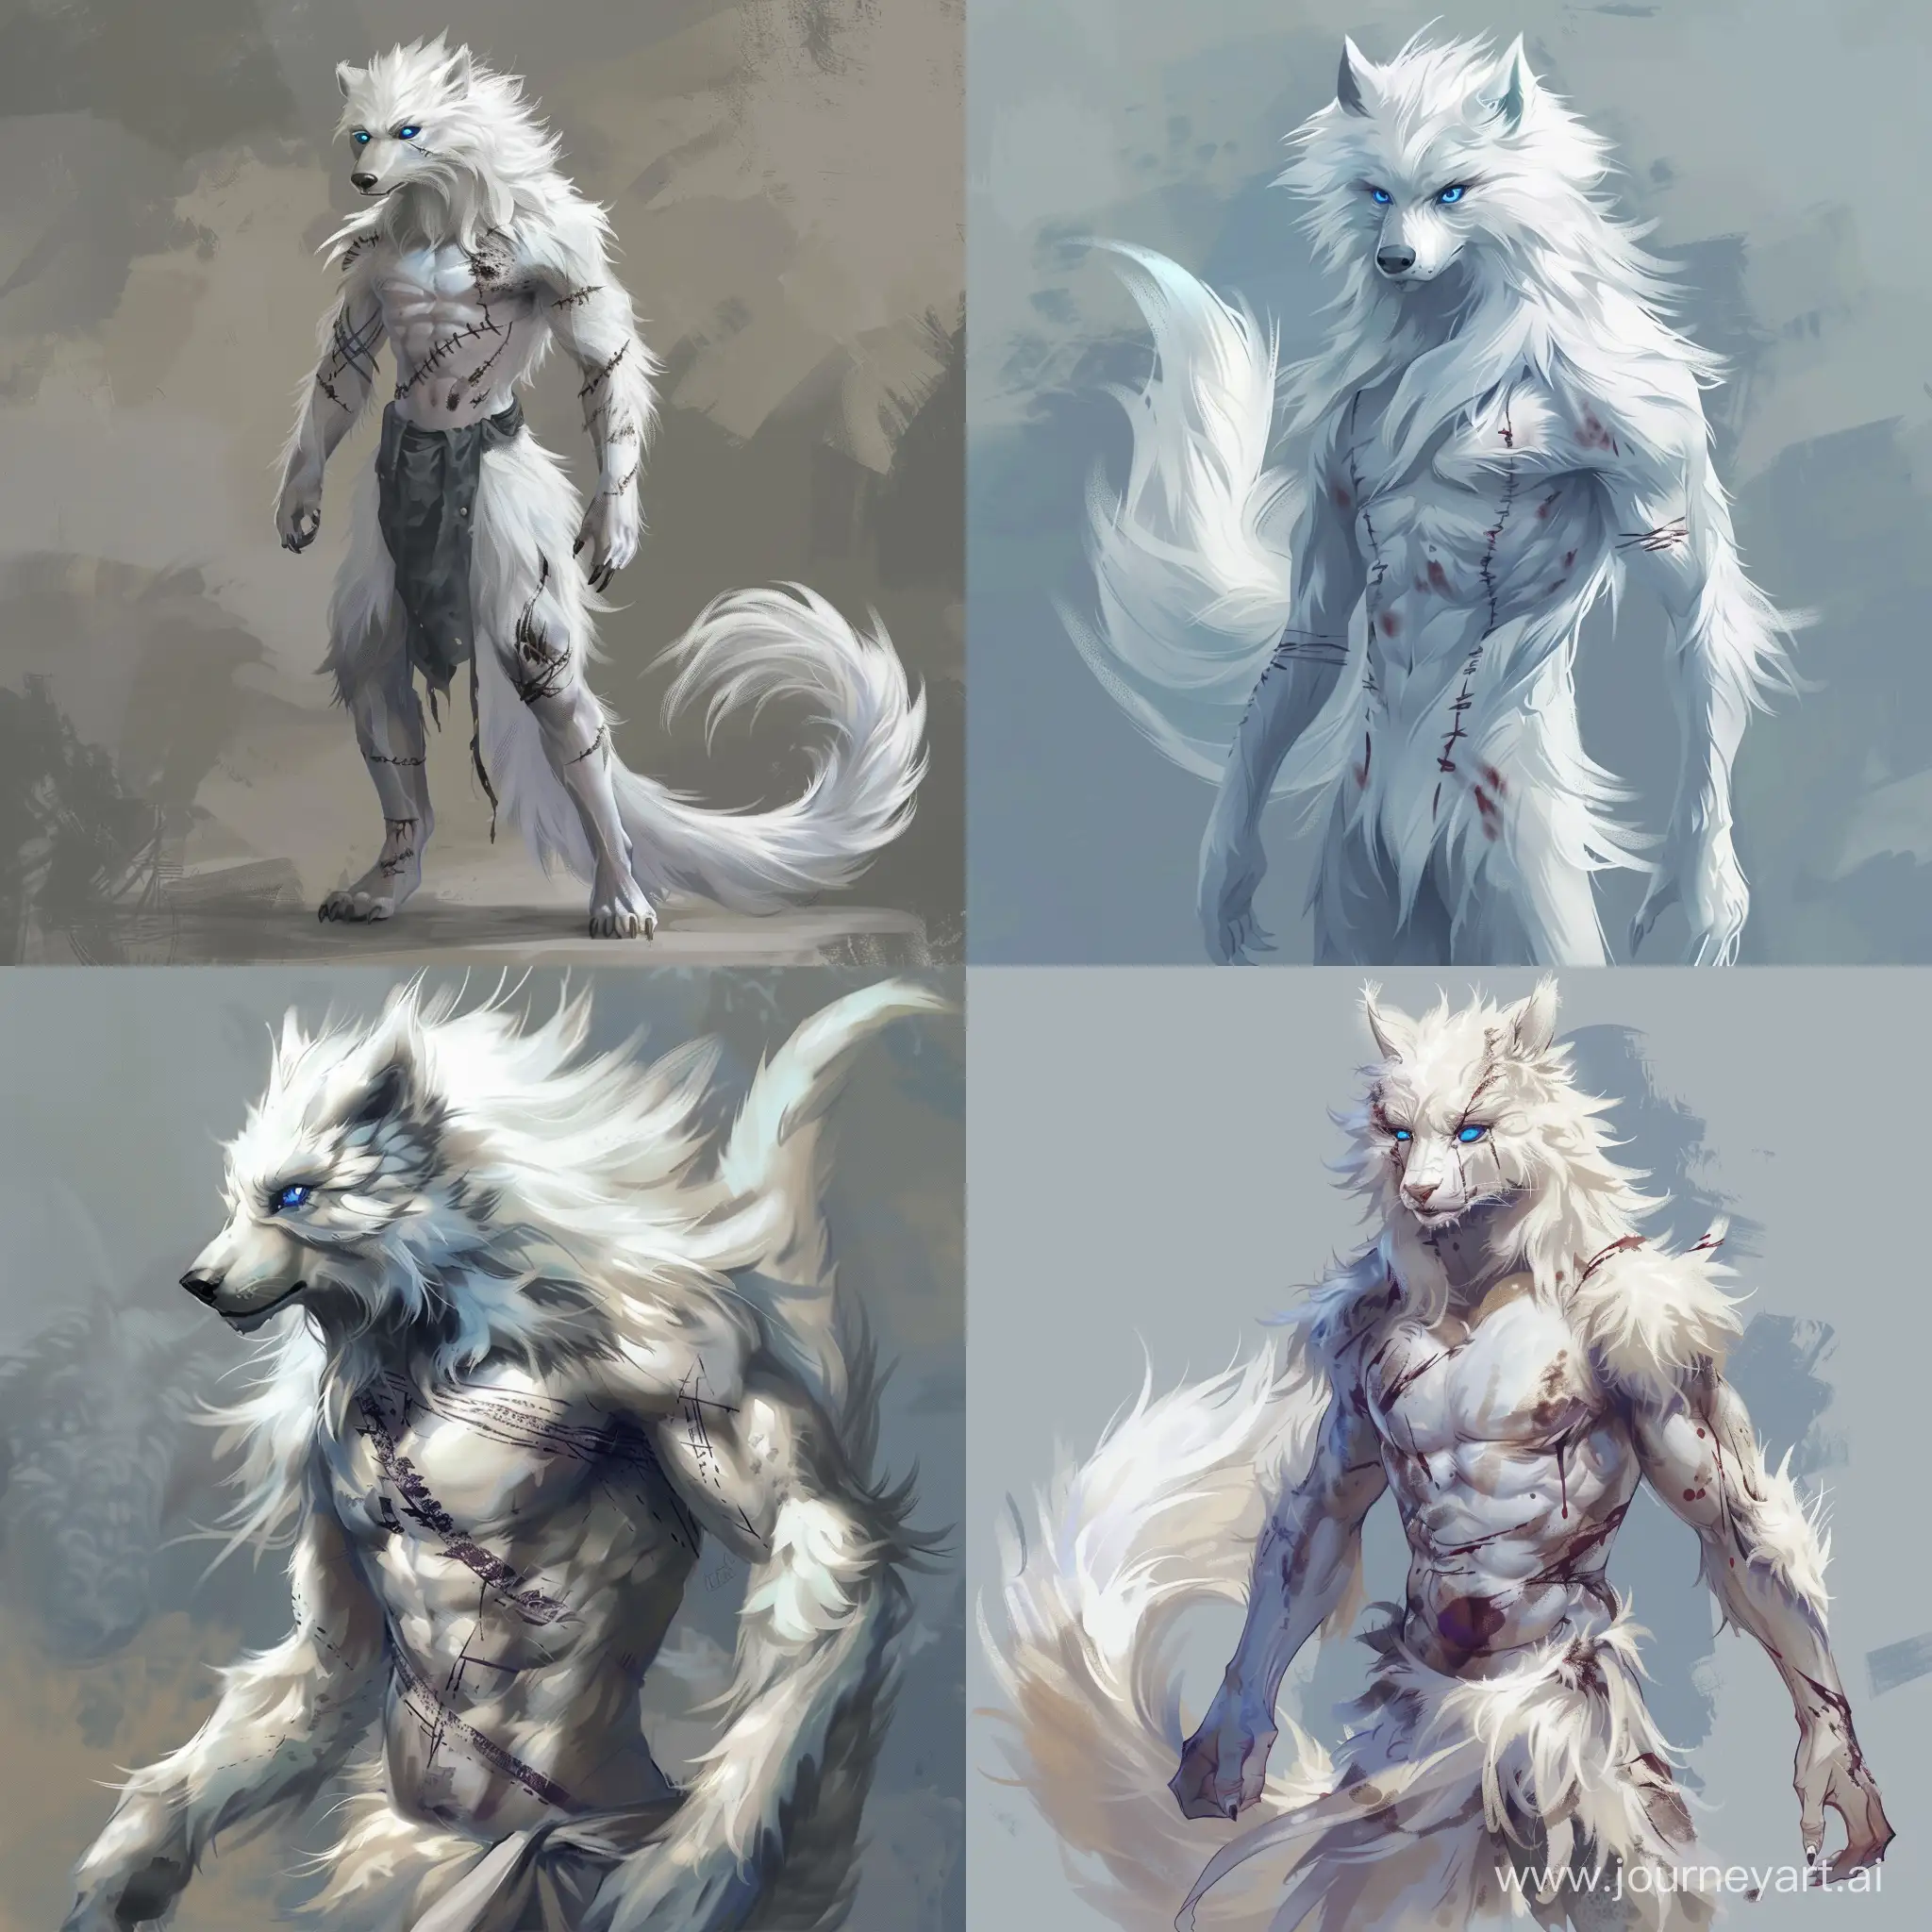 Majestic-White-Werewolf-with-Scars-Enigmatic-Creature-in-Moonlight